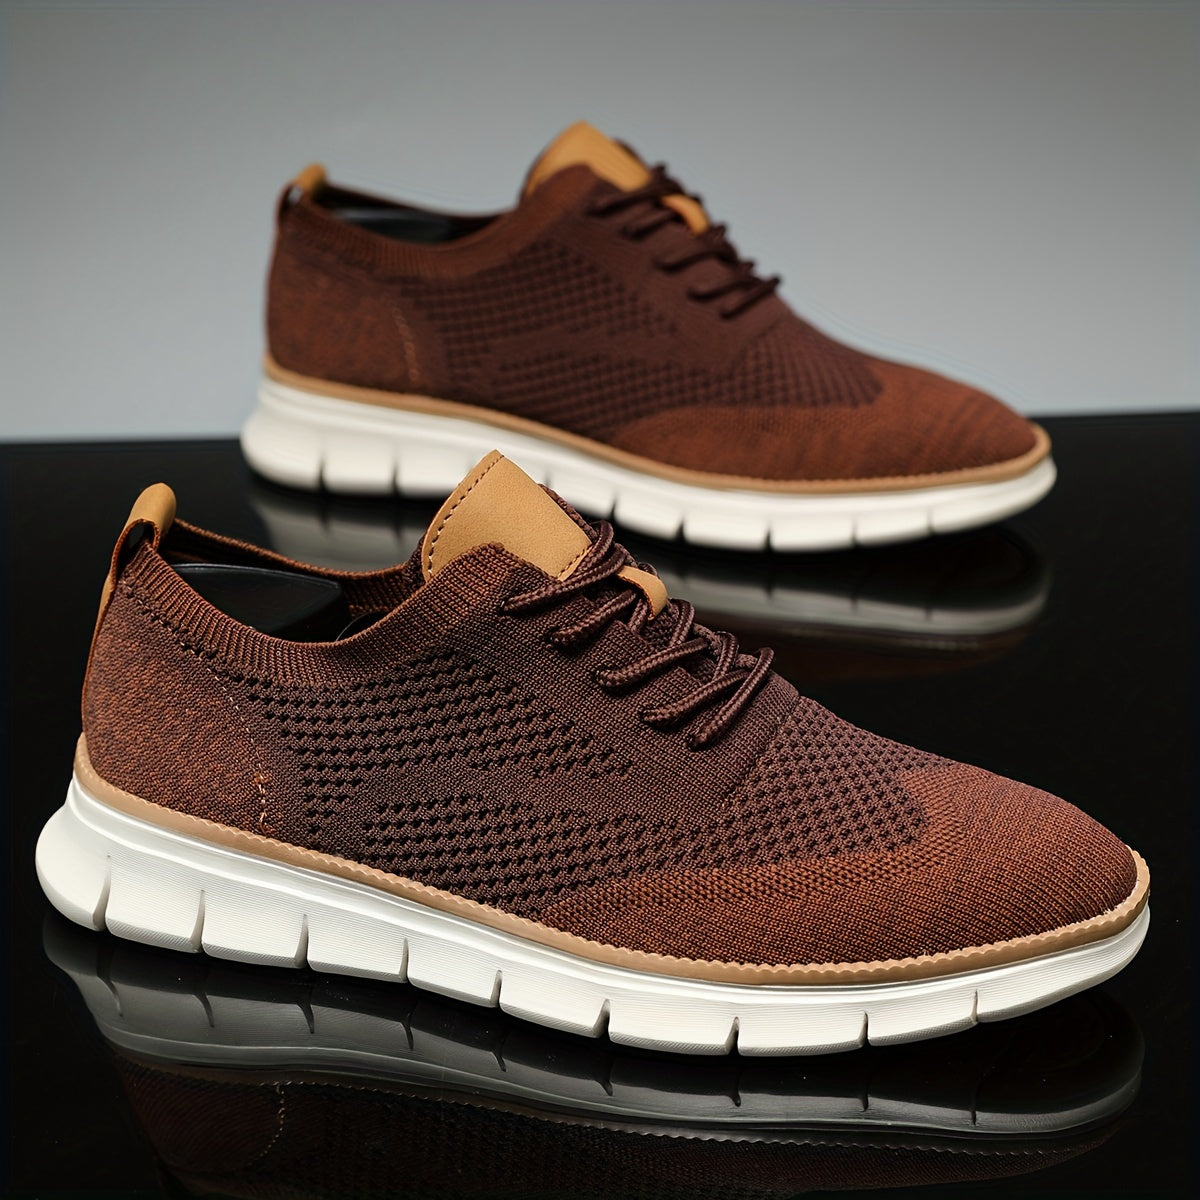 Trendy Woven Knit Breathable Sneakers - Comfy Non-Slip Lace-Up Shoes for Outdoor Activities